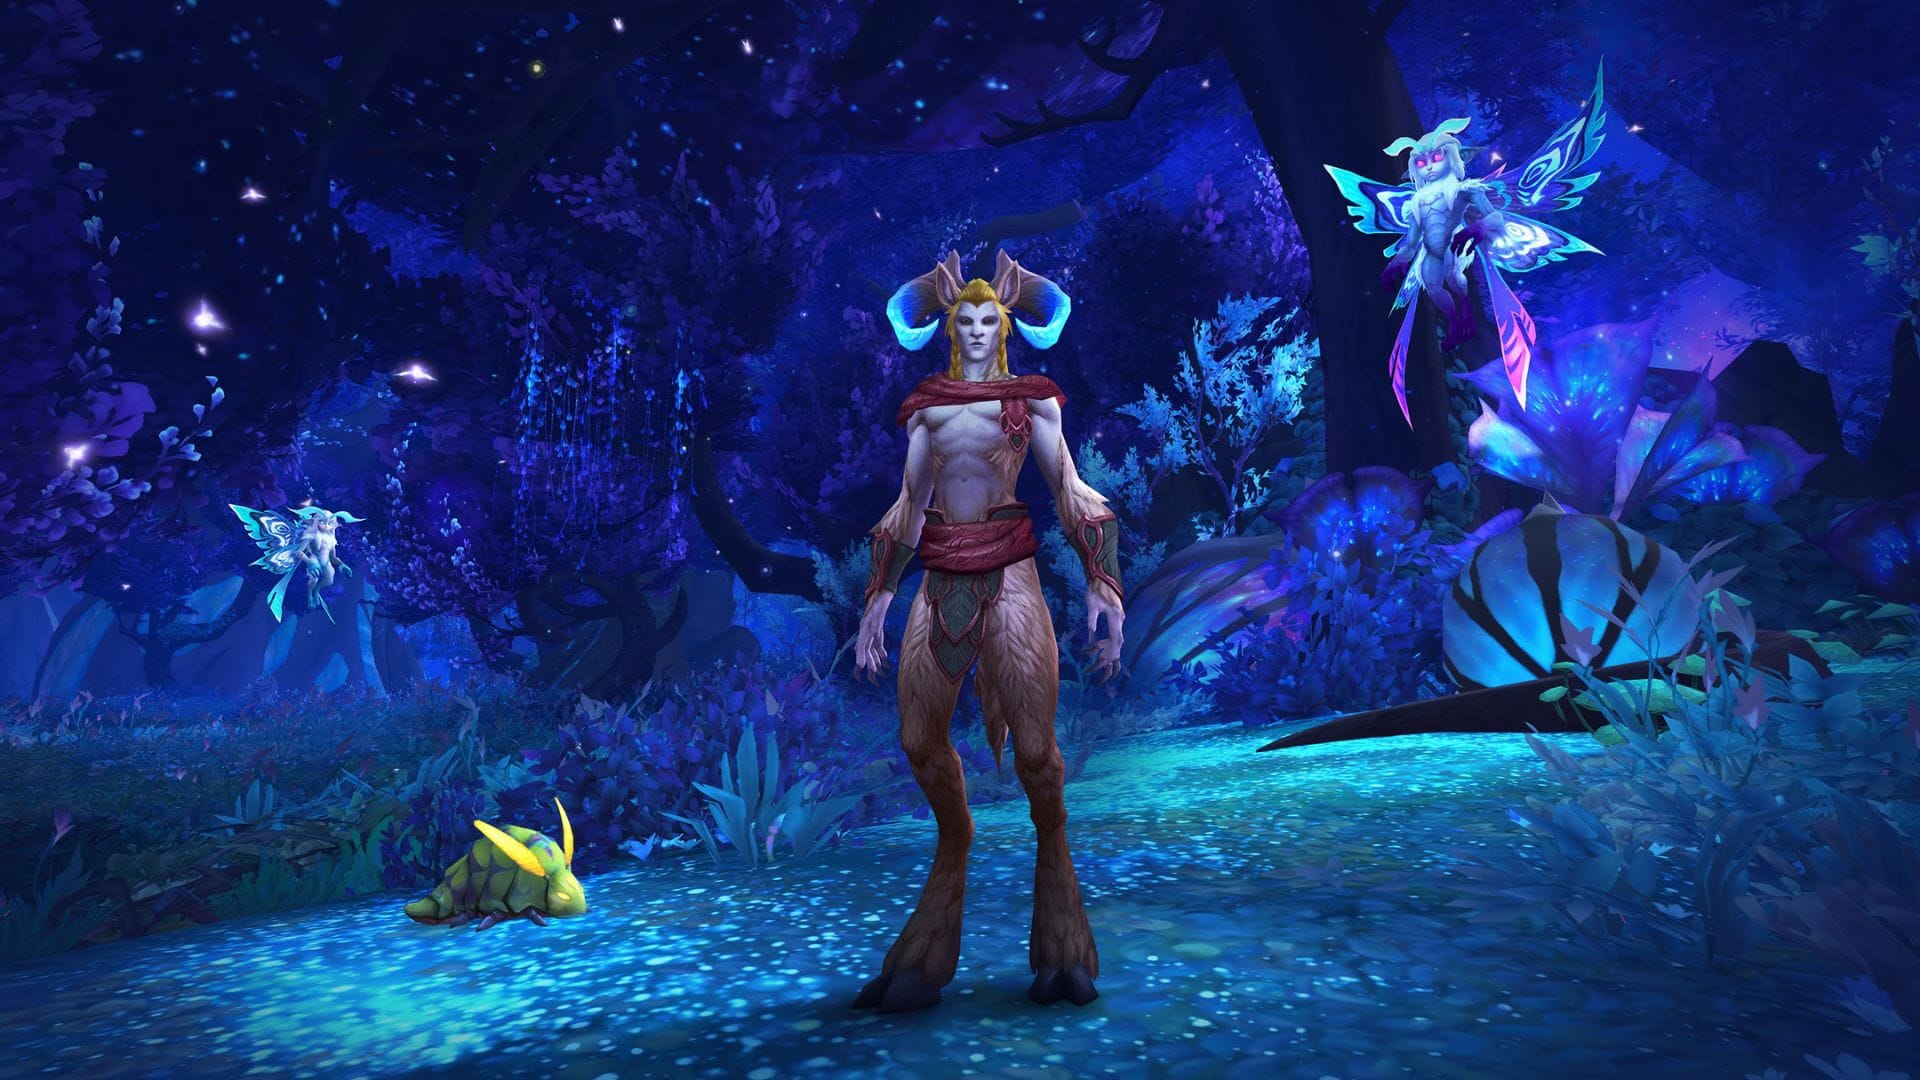 Screenshot of a faun character from World of Warcraft